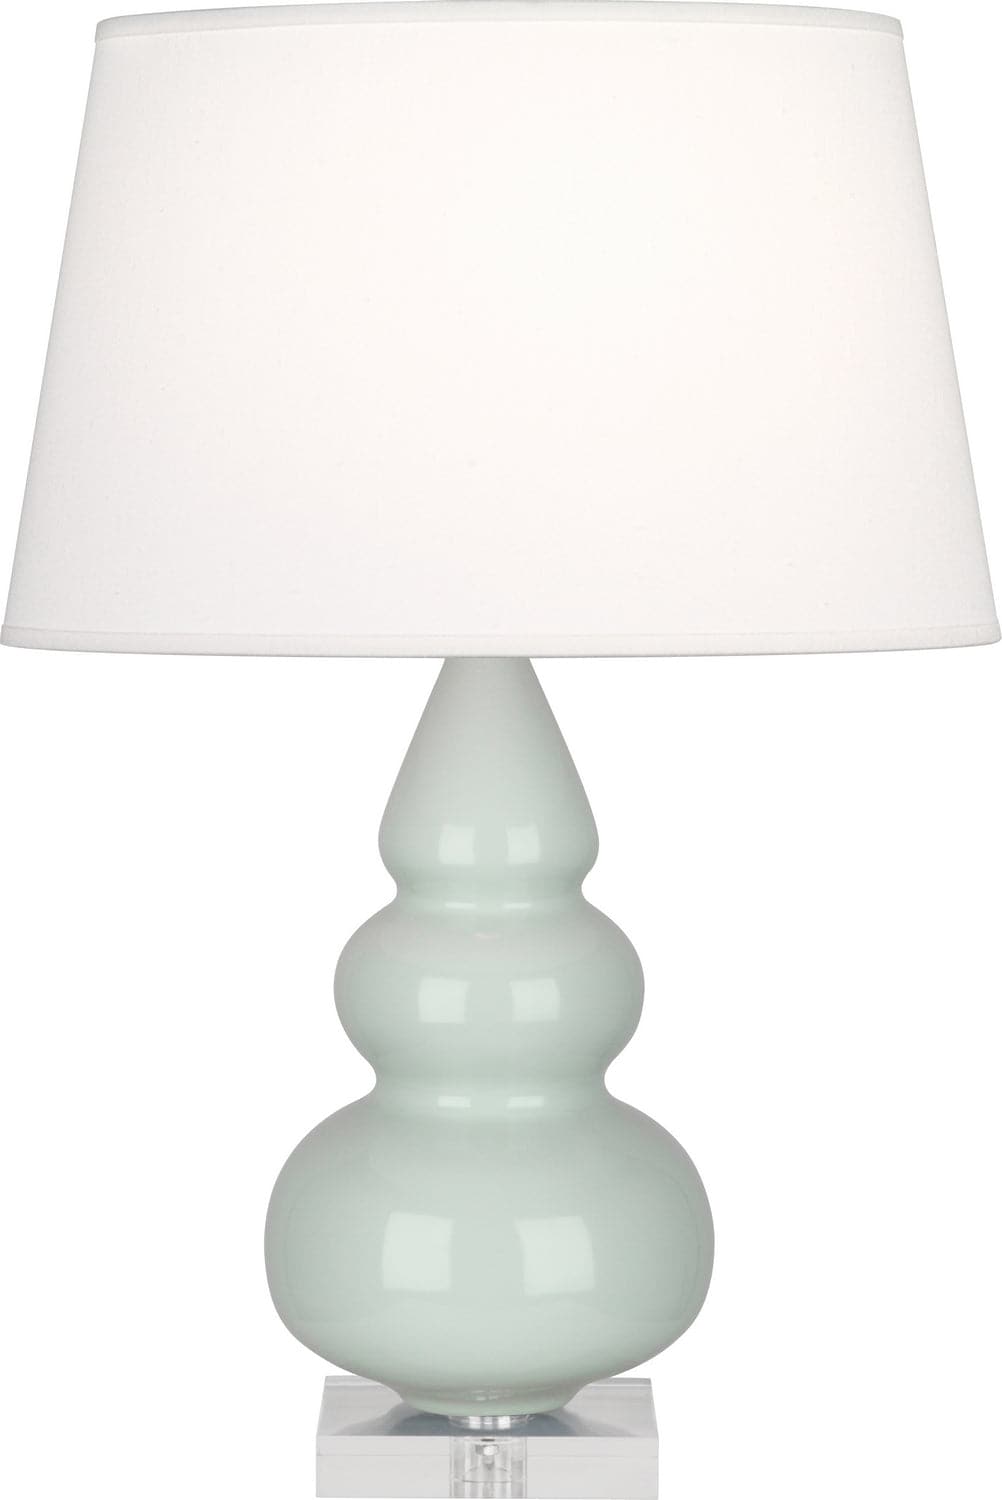 Robert Abbey - A258X - One Light Accent Lamp - Small Triple Gourd - Celadon Glazed w/Lucite Base